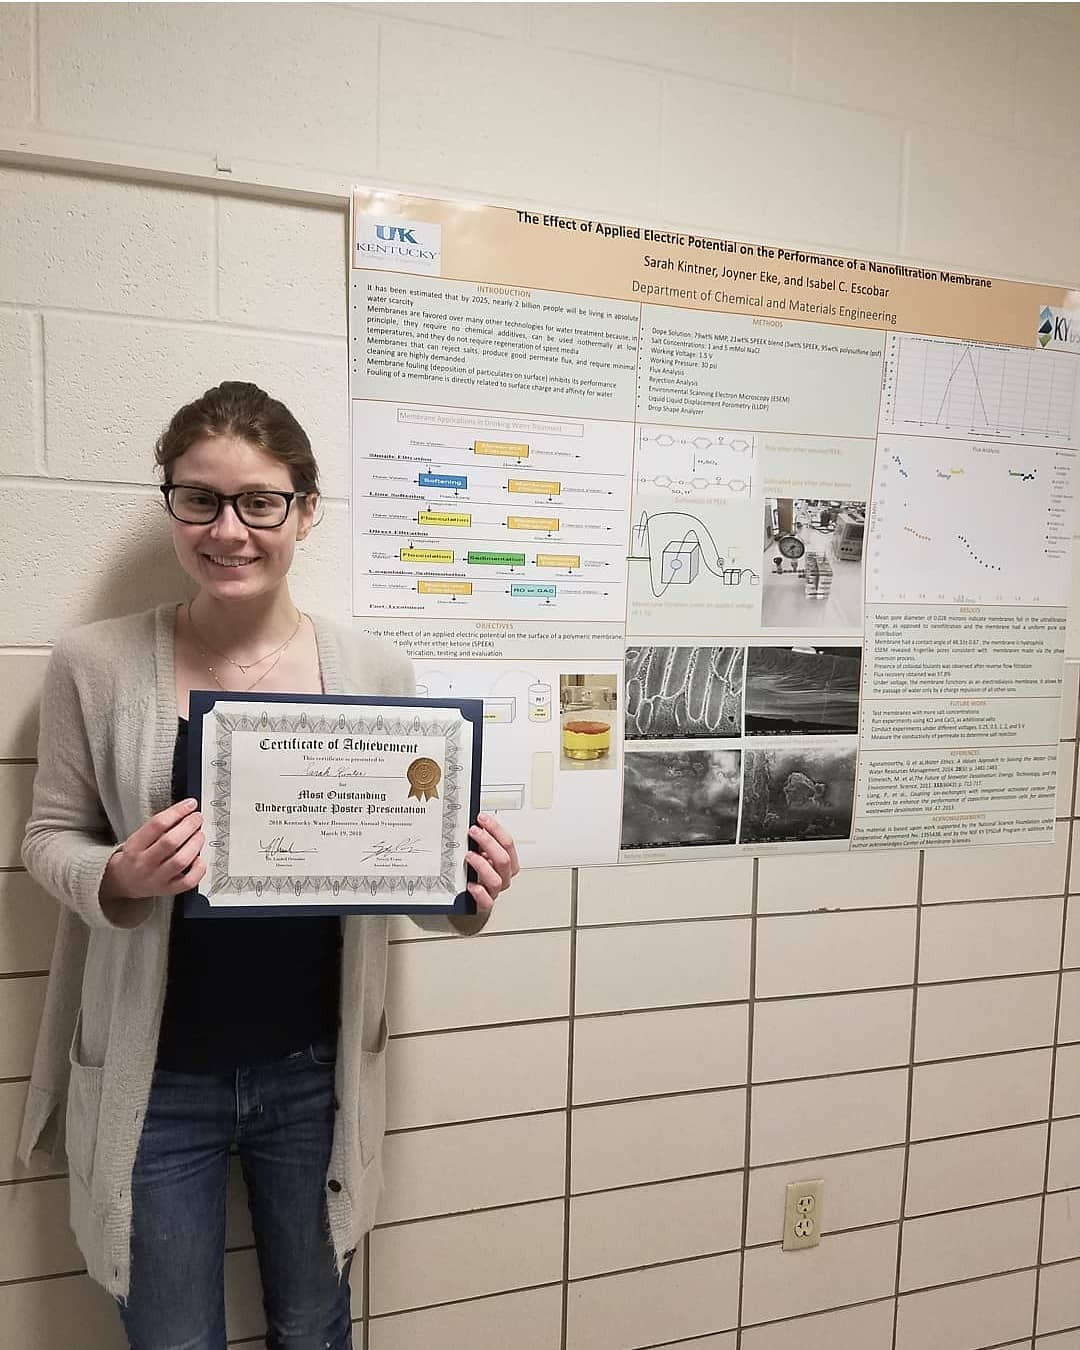  Sarah Kintner with her “Most Outstanding Undergraduate Poster Presentation” certificate. 